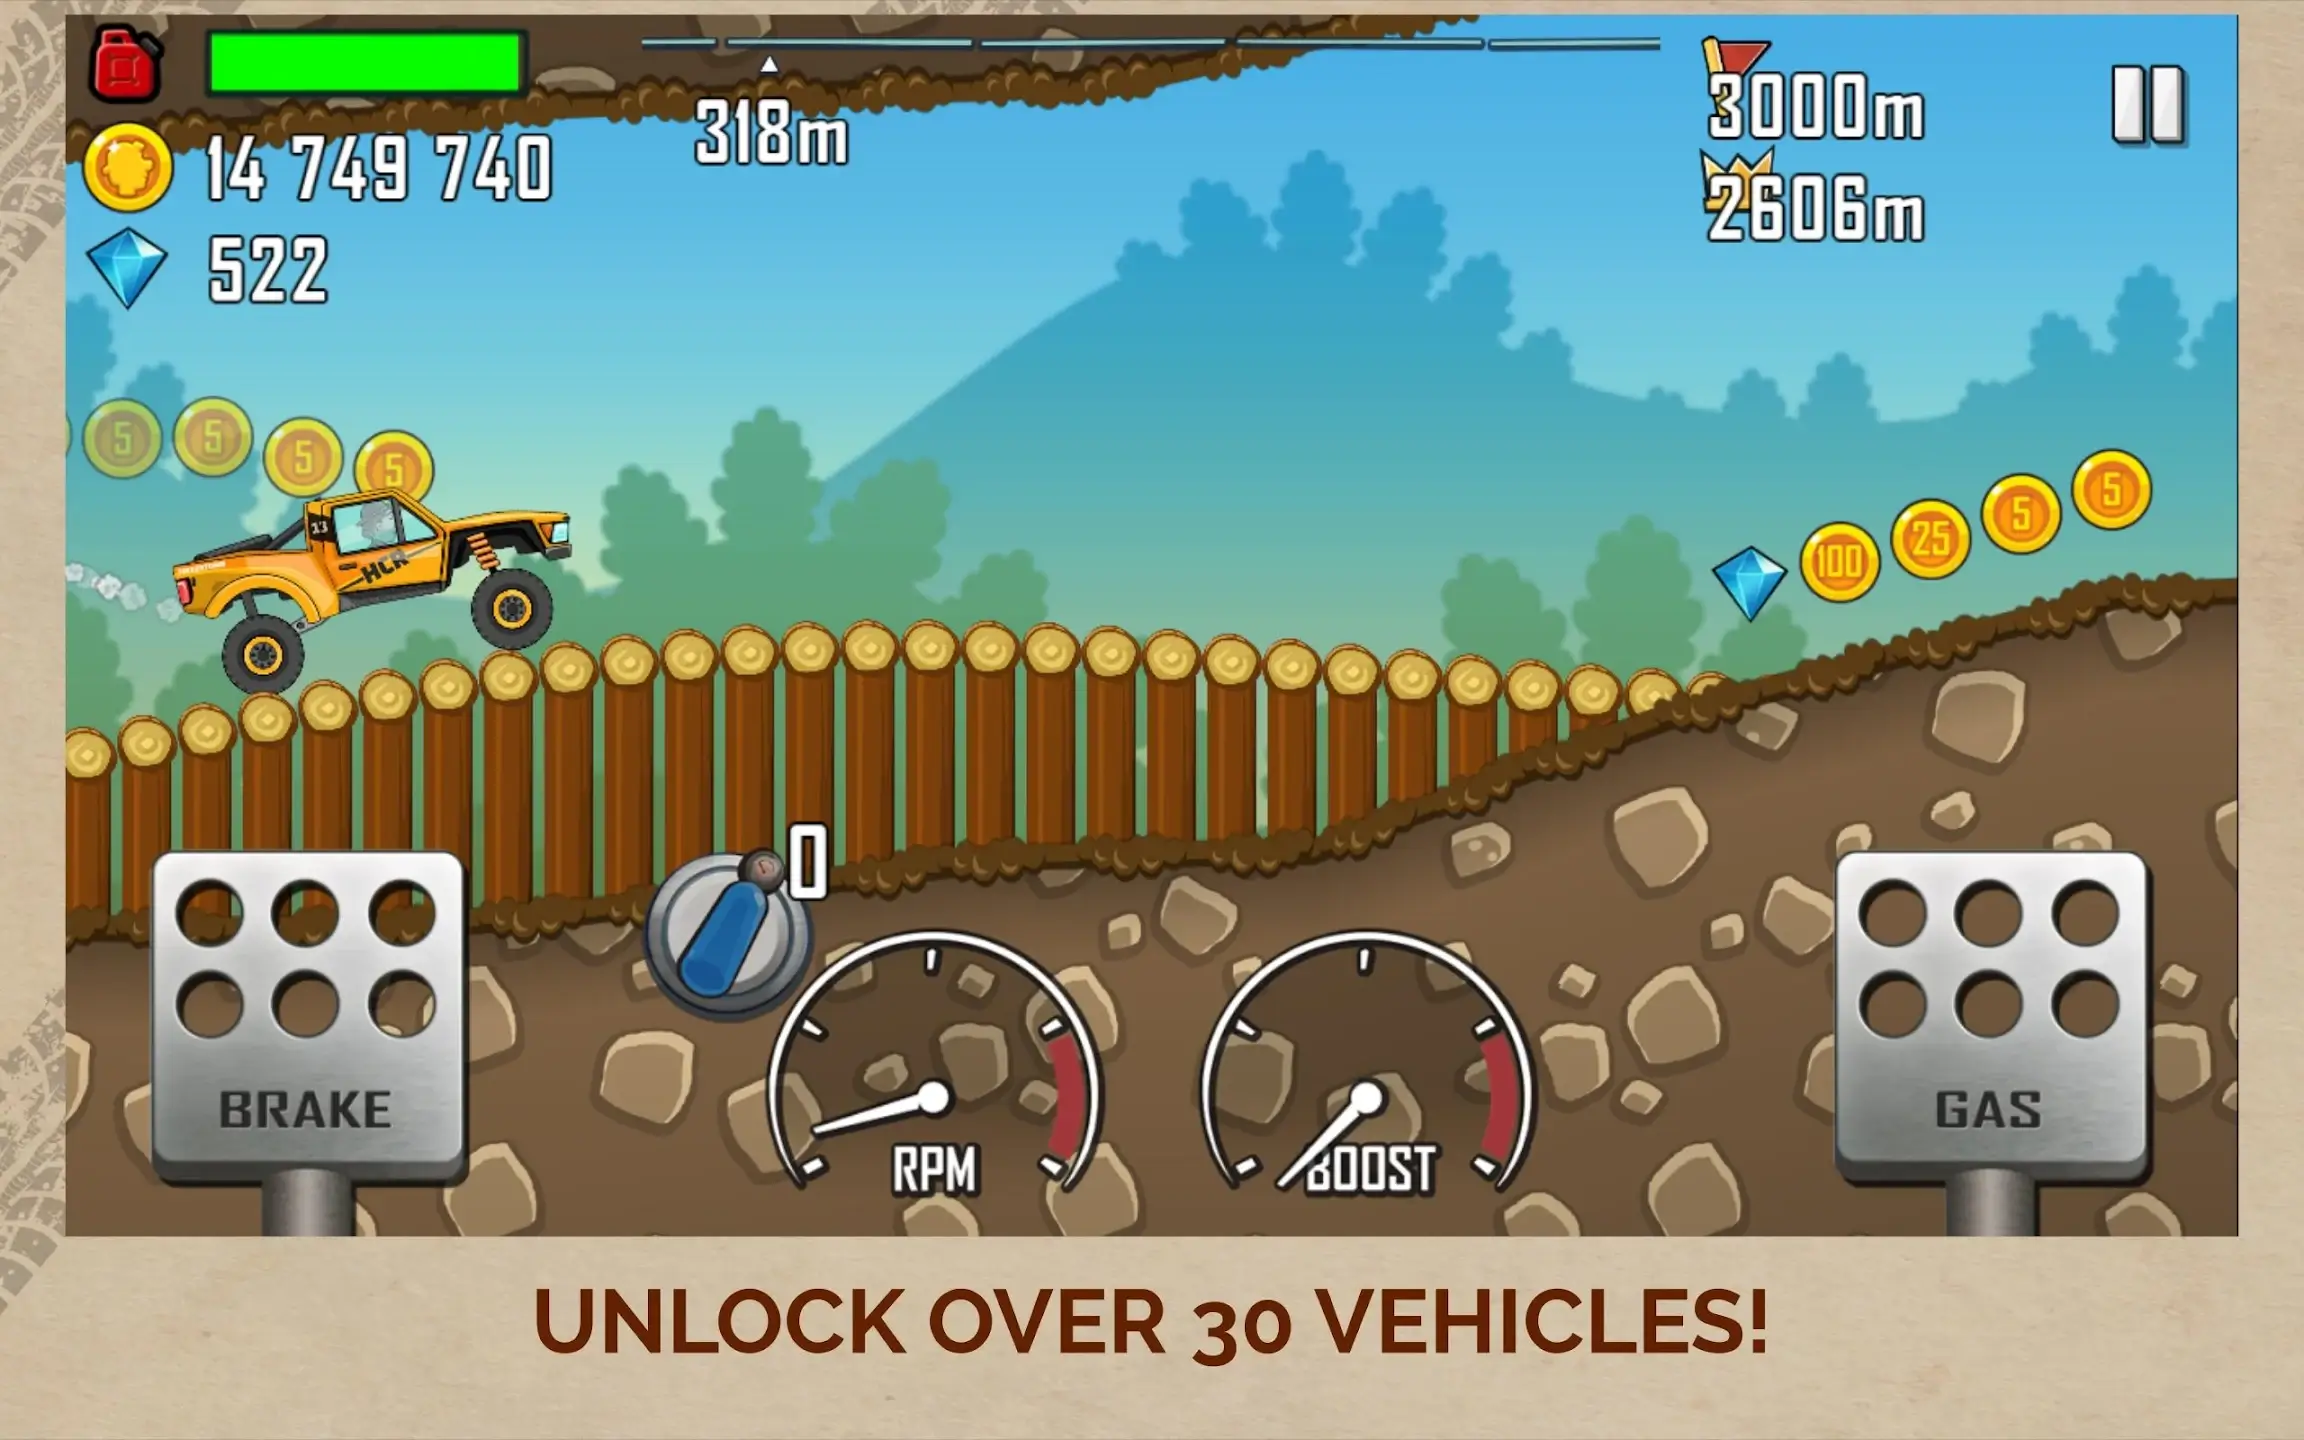 Xtreme Hill Climb Car Racing: Unlimited Coins, Car by ifthaker